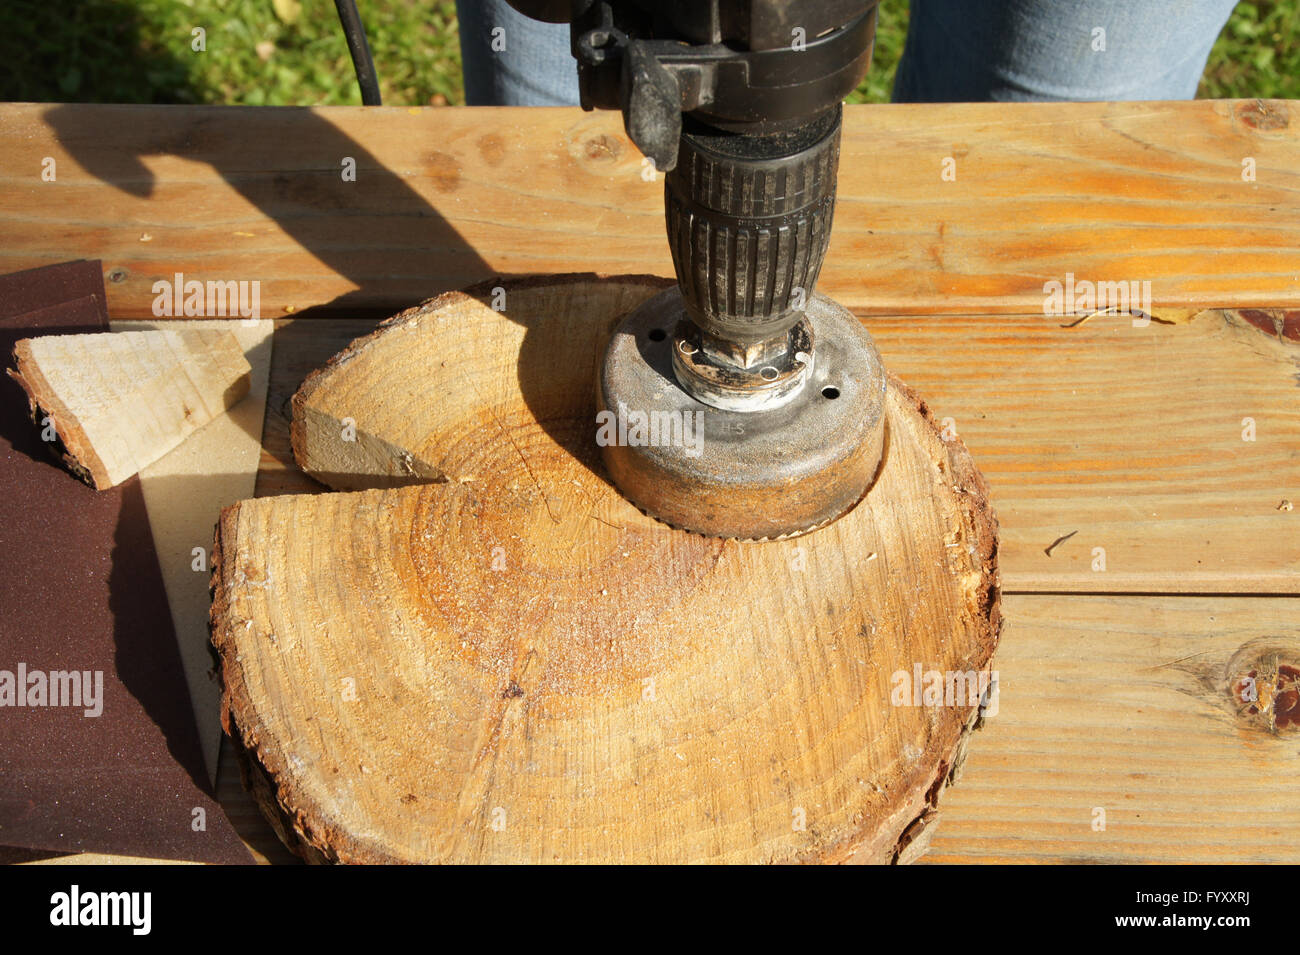 Sawing cedar-wood slices Stock Photo